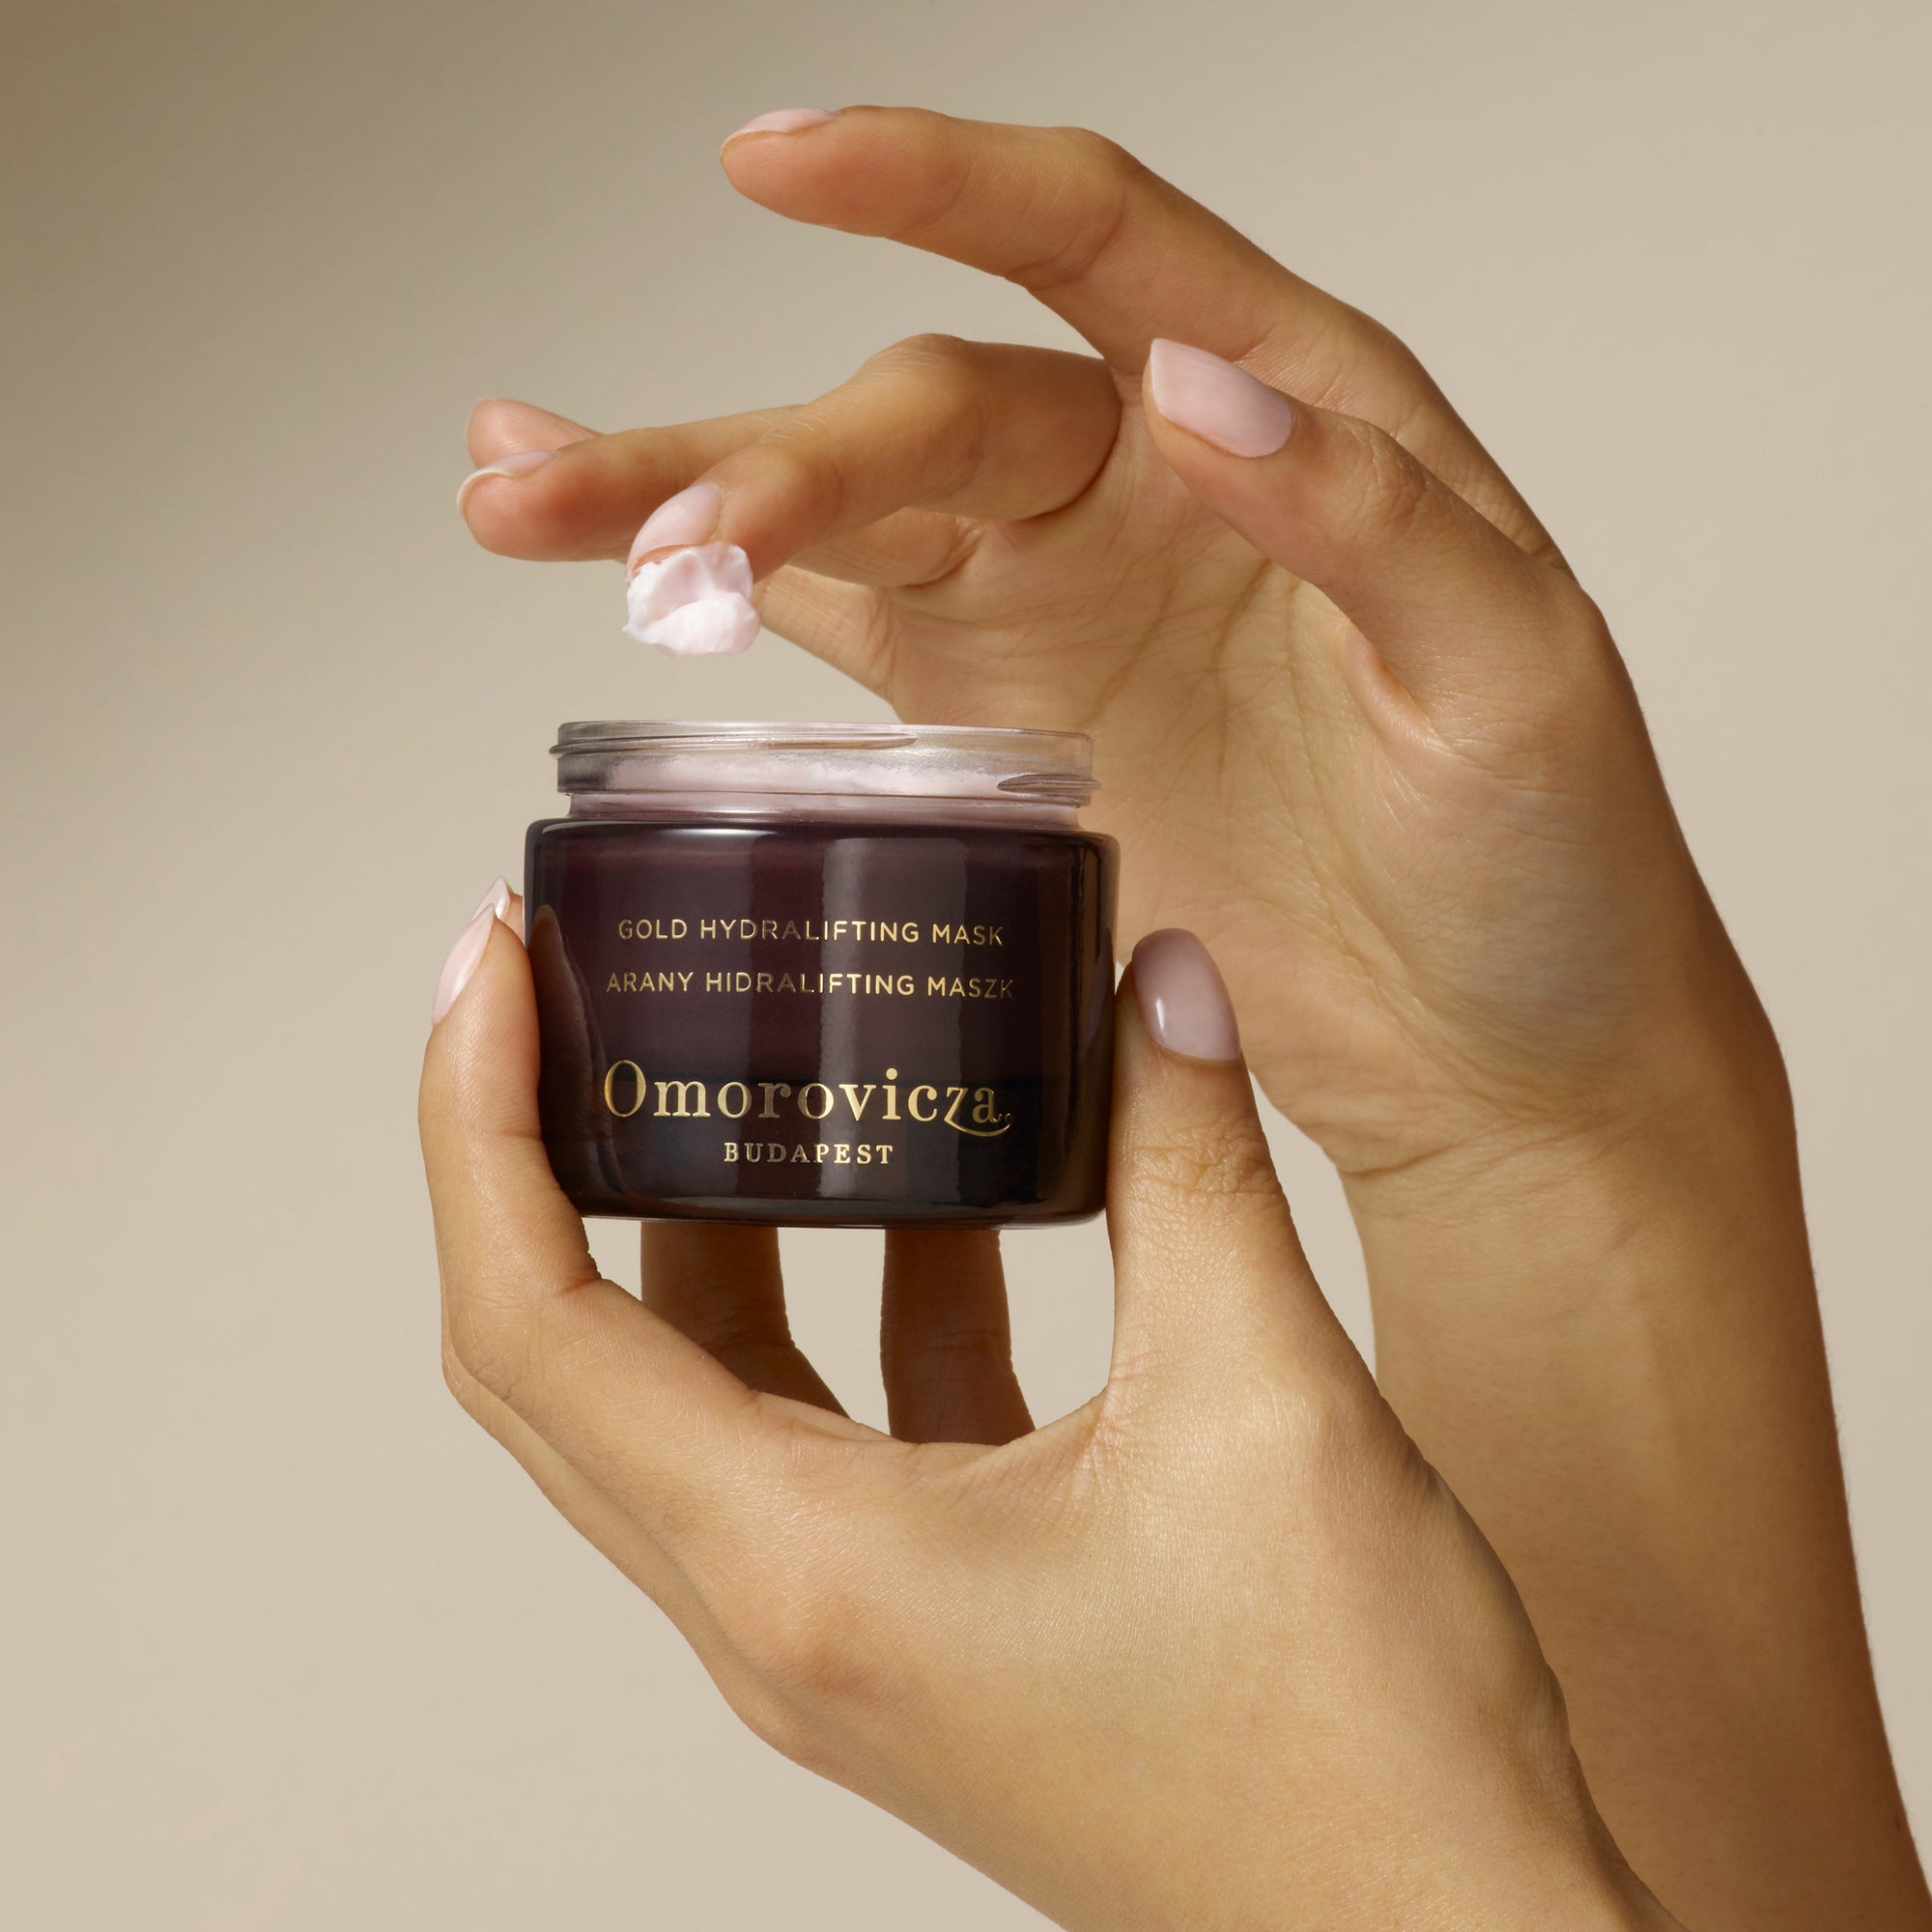 hands are holding Gold Hydralifting Mask with a little bit of products on their finger.